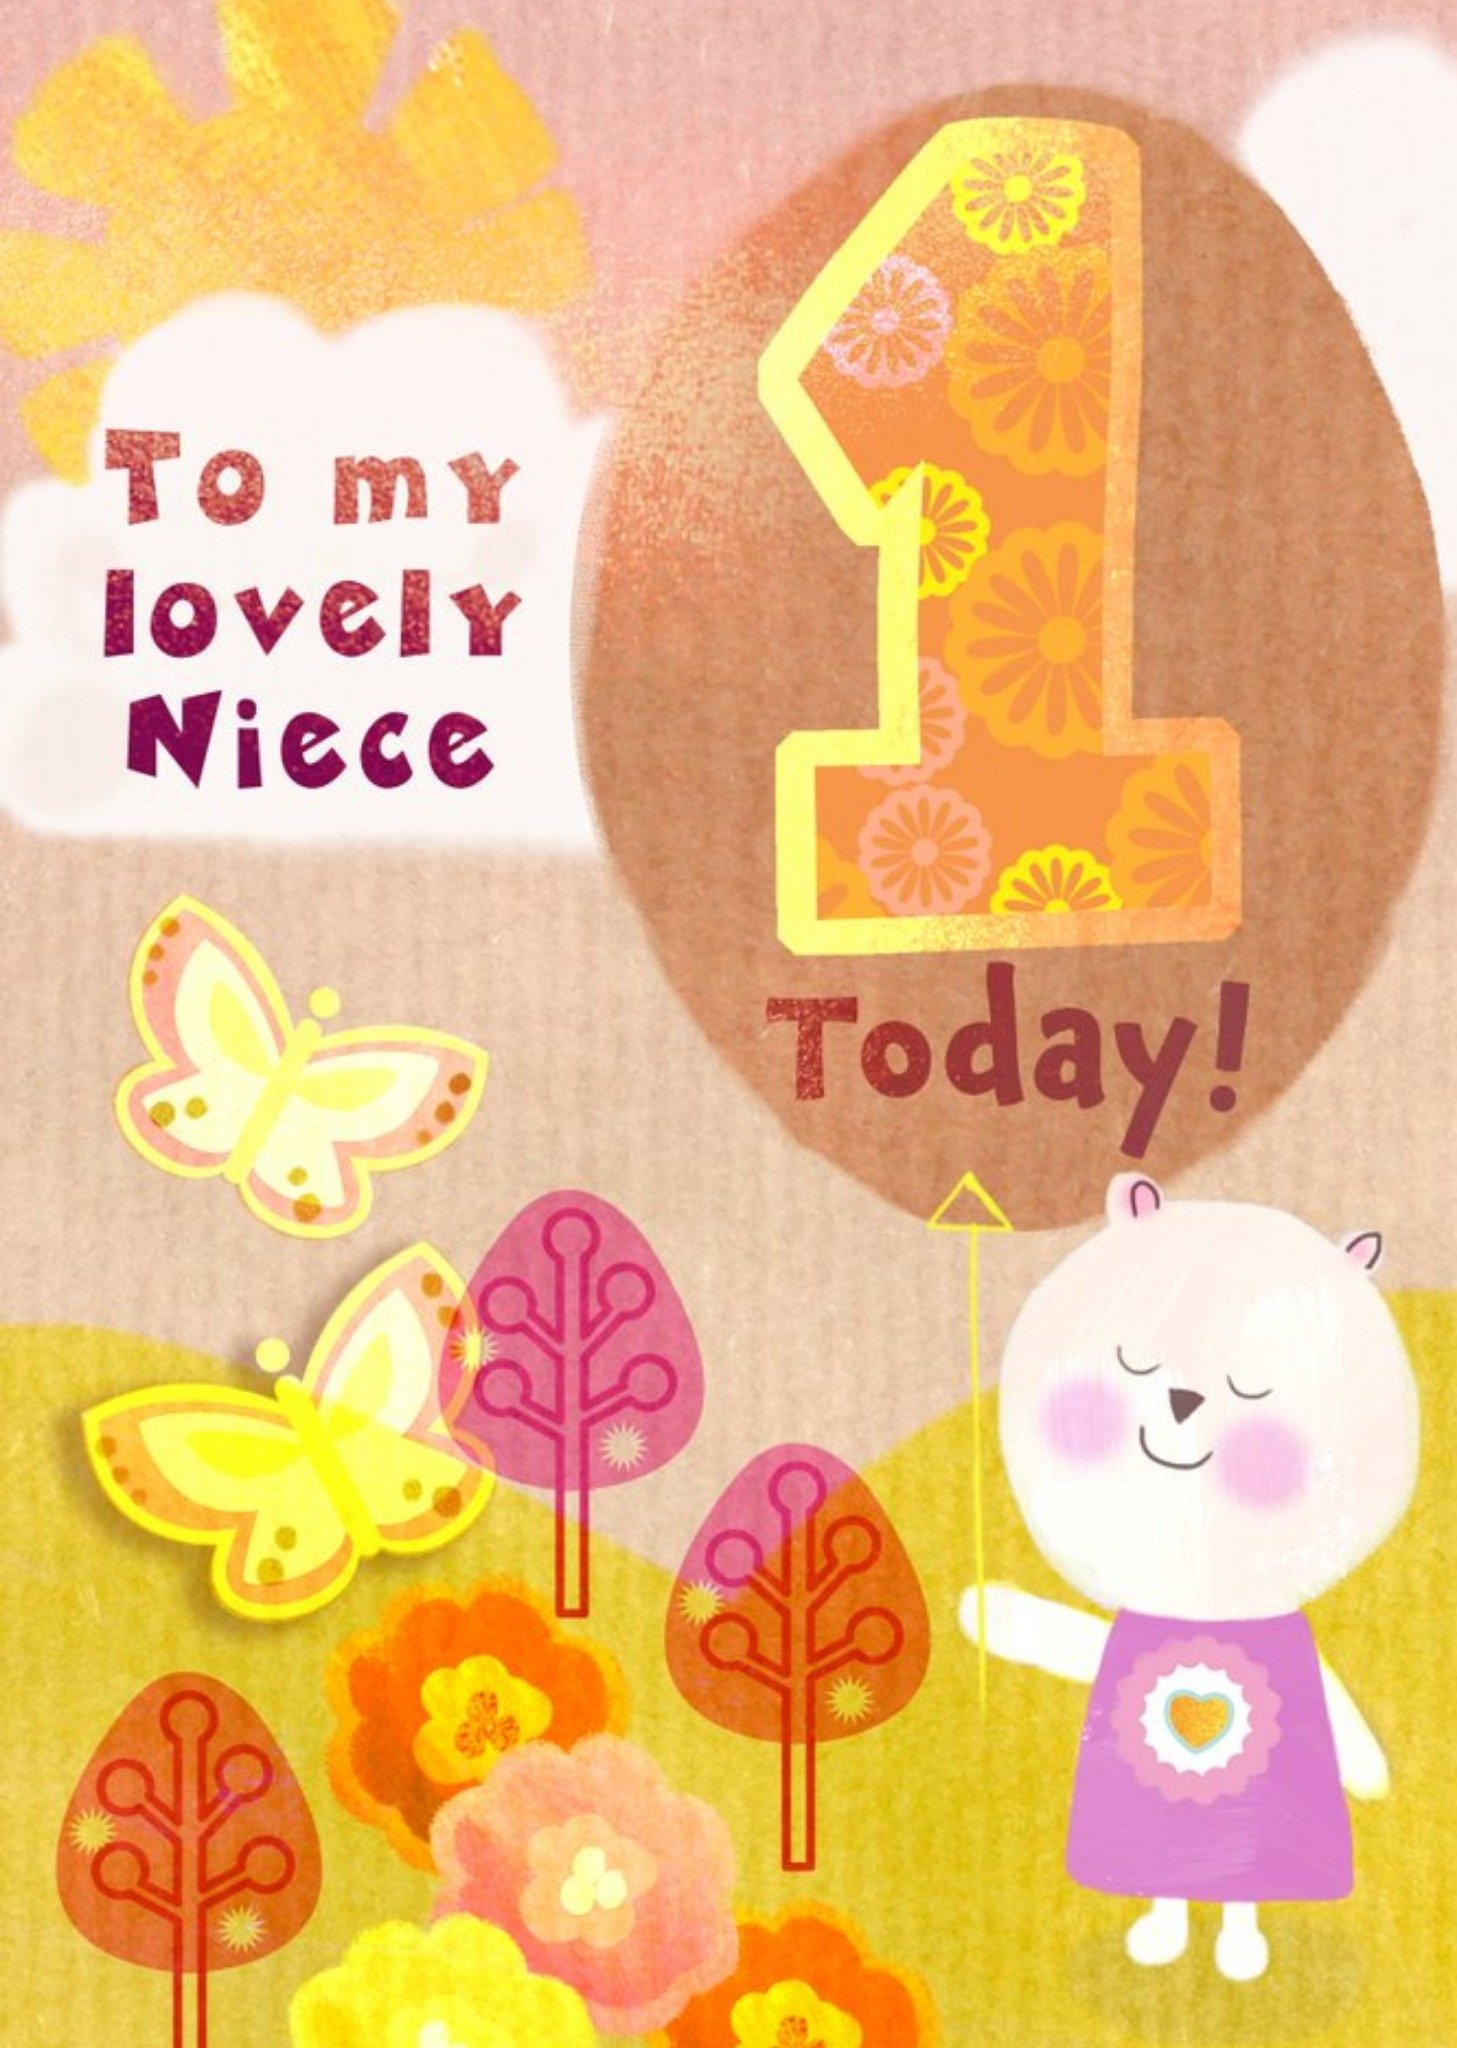 Moonpig Bear And Butterflies To My Lovely Niece 1 Today Birthday Card, Large